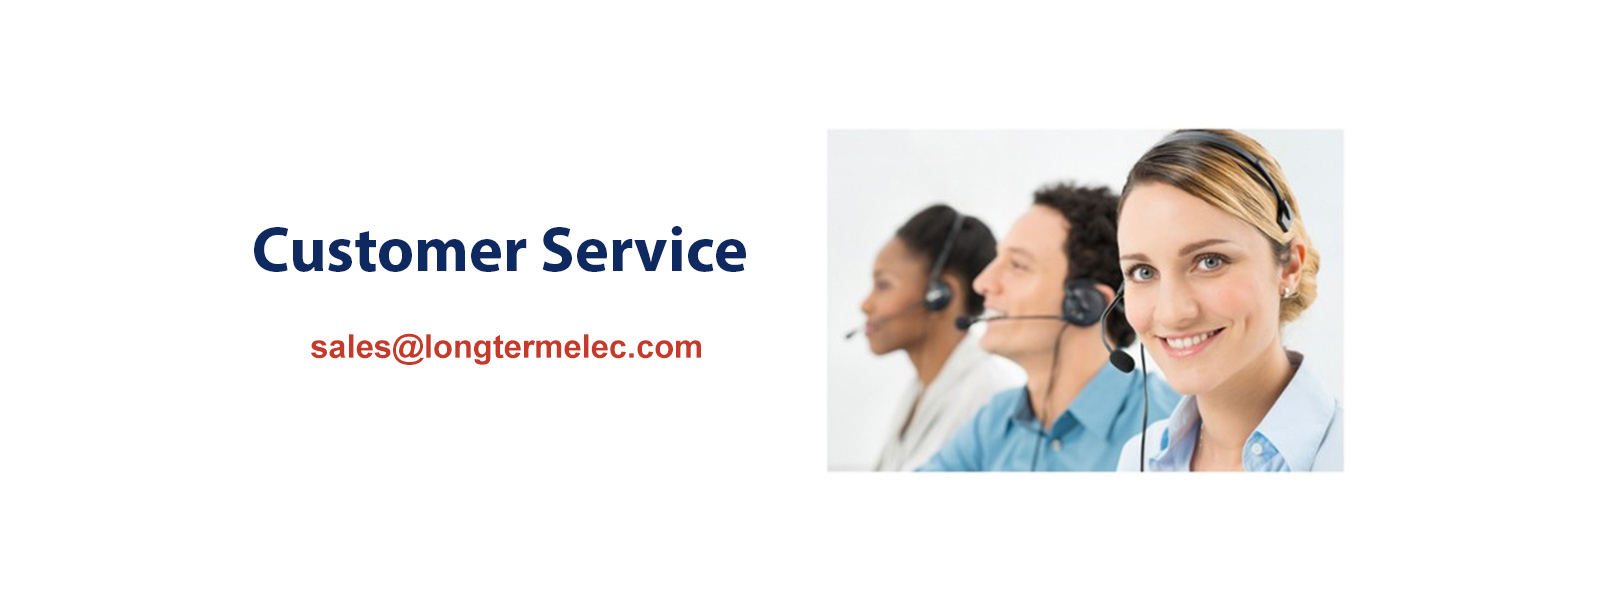 Customer Service Contact  Number